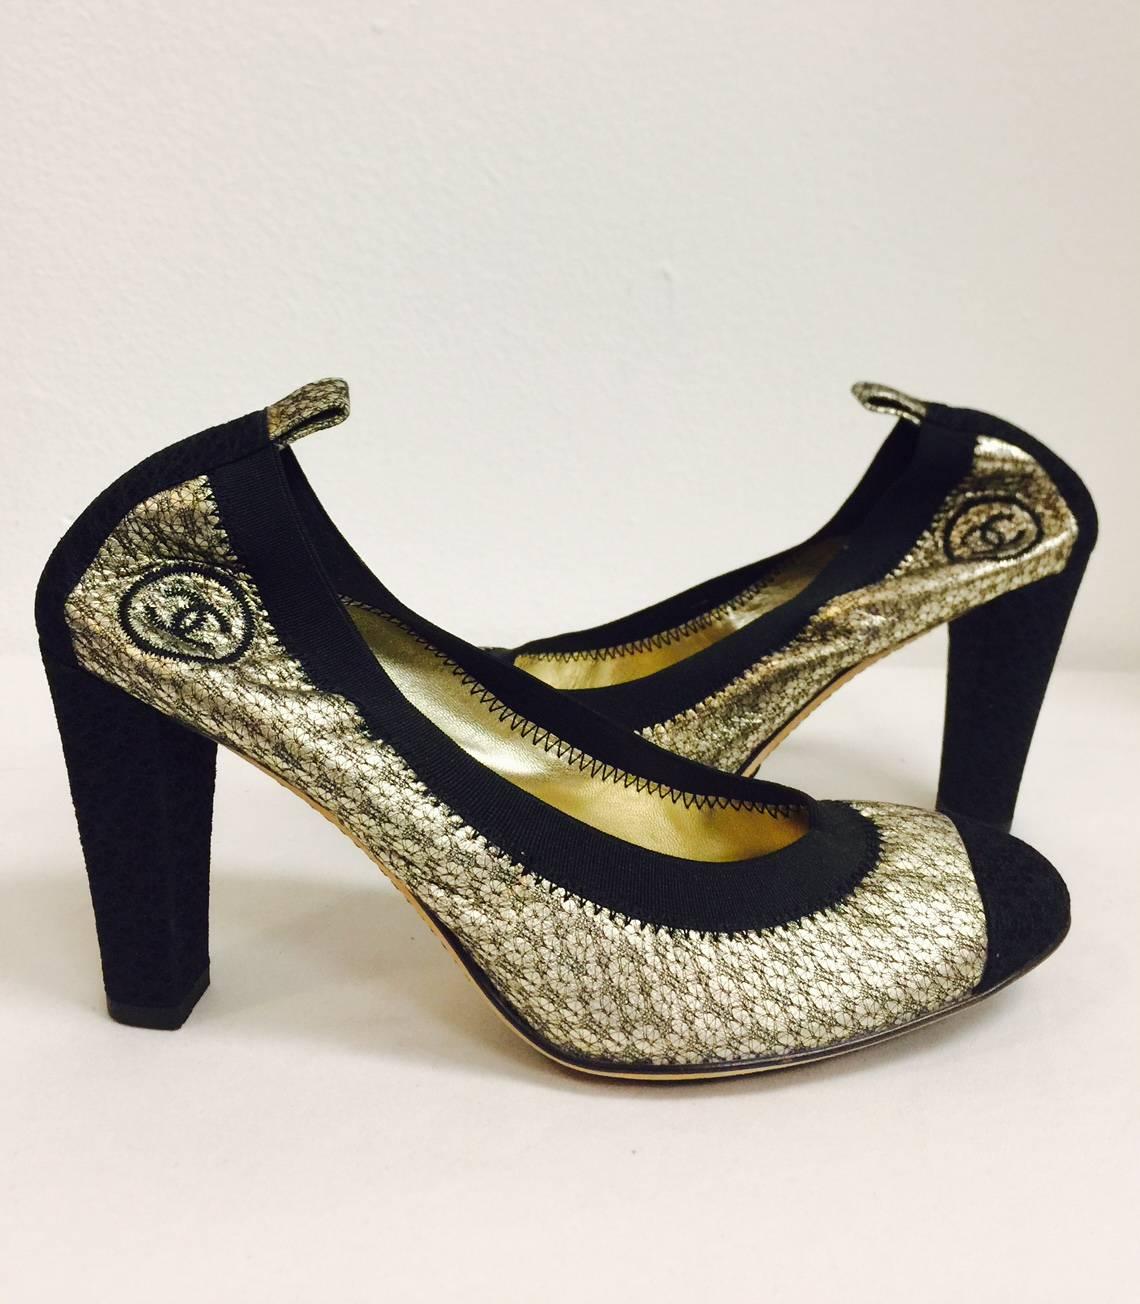 Chanel Antique Gold Metallic Leather and Black Brocade Pumps promise an unforgettable evening!  Features signature diamond quilted leather soles and antique metallic gold leather with feminine floral design. Metallic gold leather lining and insoles